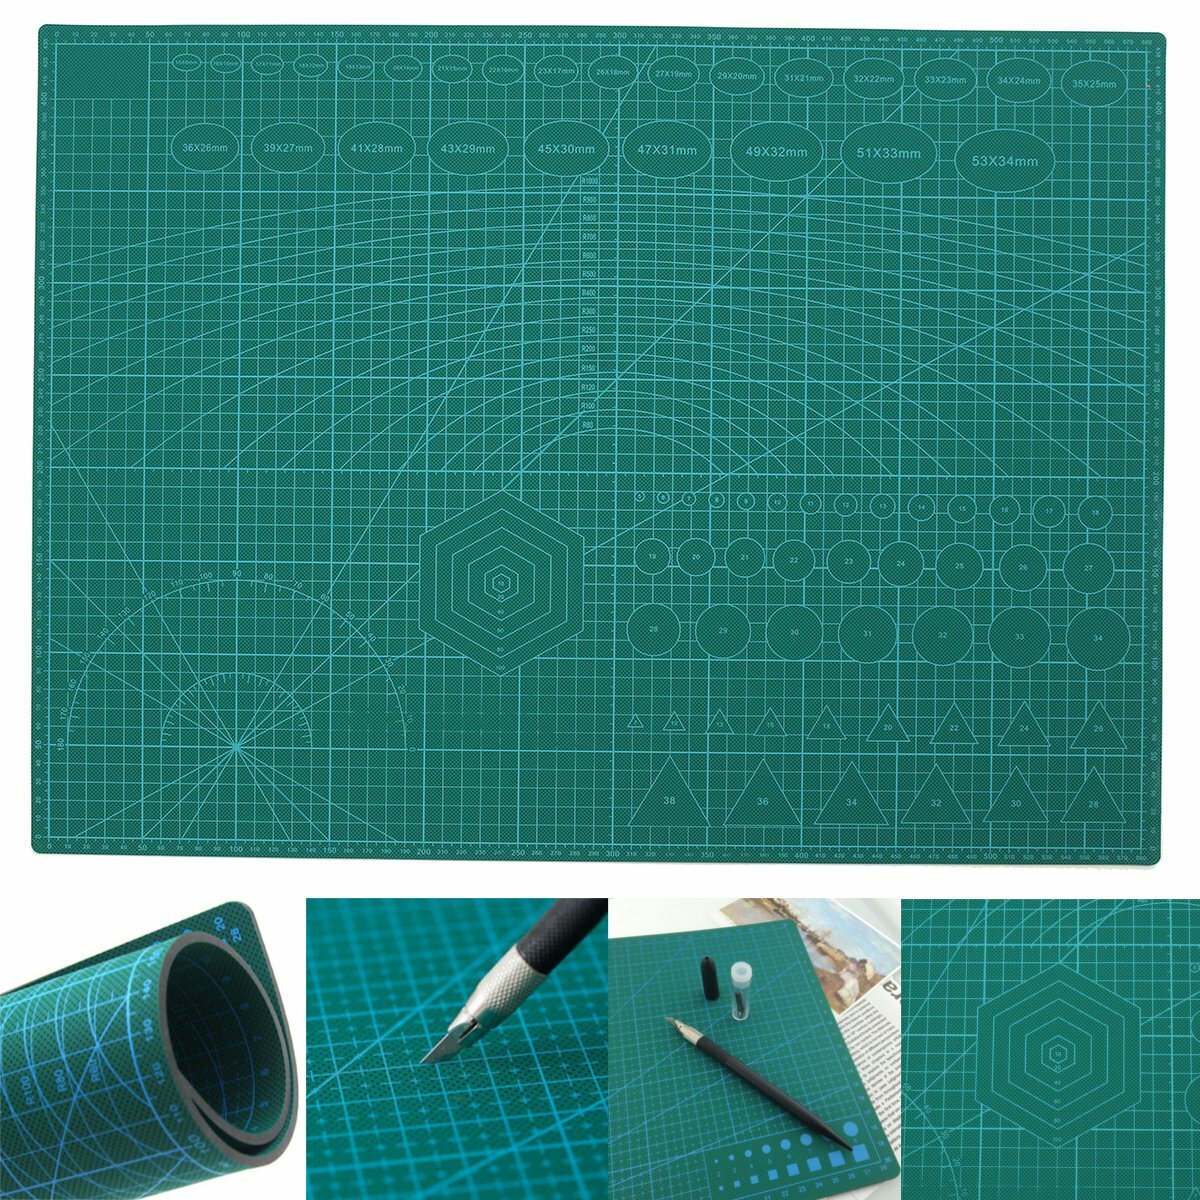 A2 PVC Double Printed Self Healing Cutting Mat Craft Quilting Scrapbooking Board, Banggood  - buy with discount